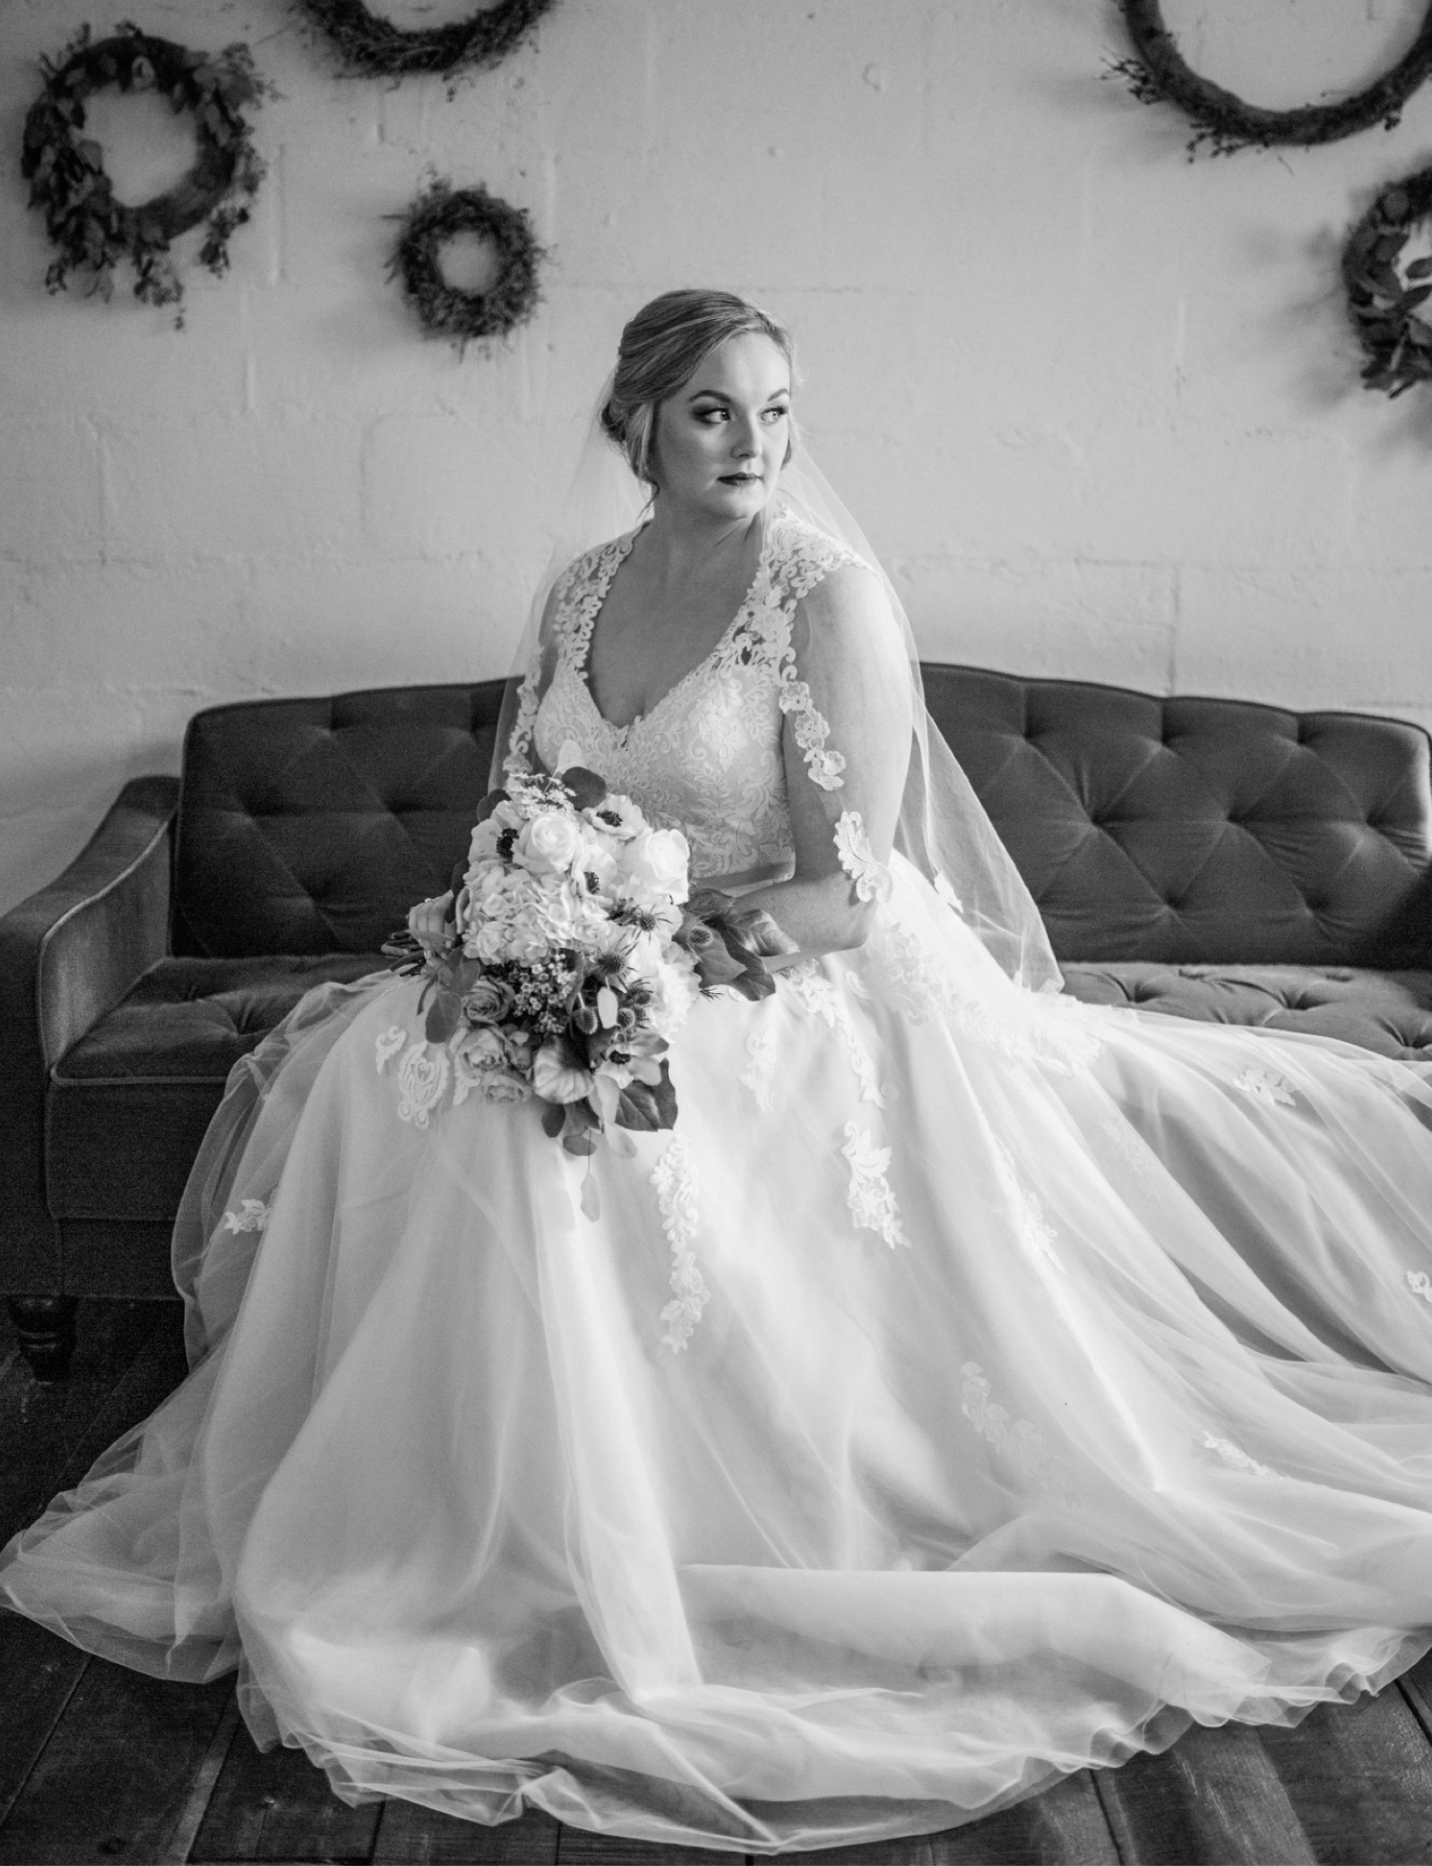 A portrait of the bride at Meadow Hill Farm.